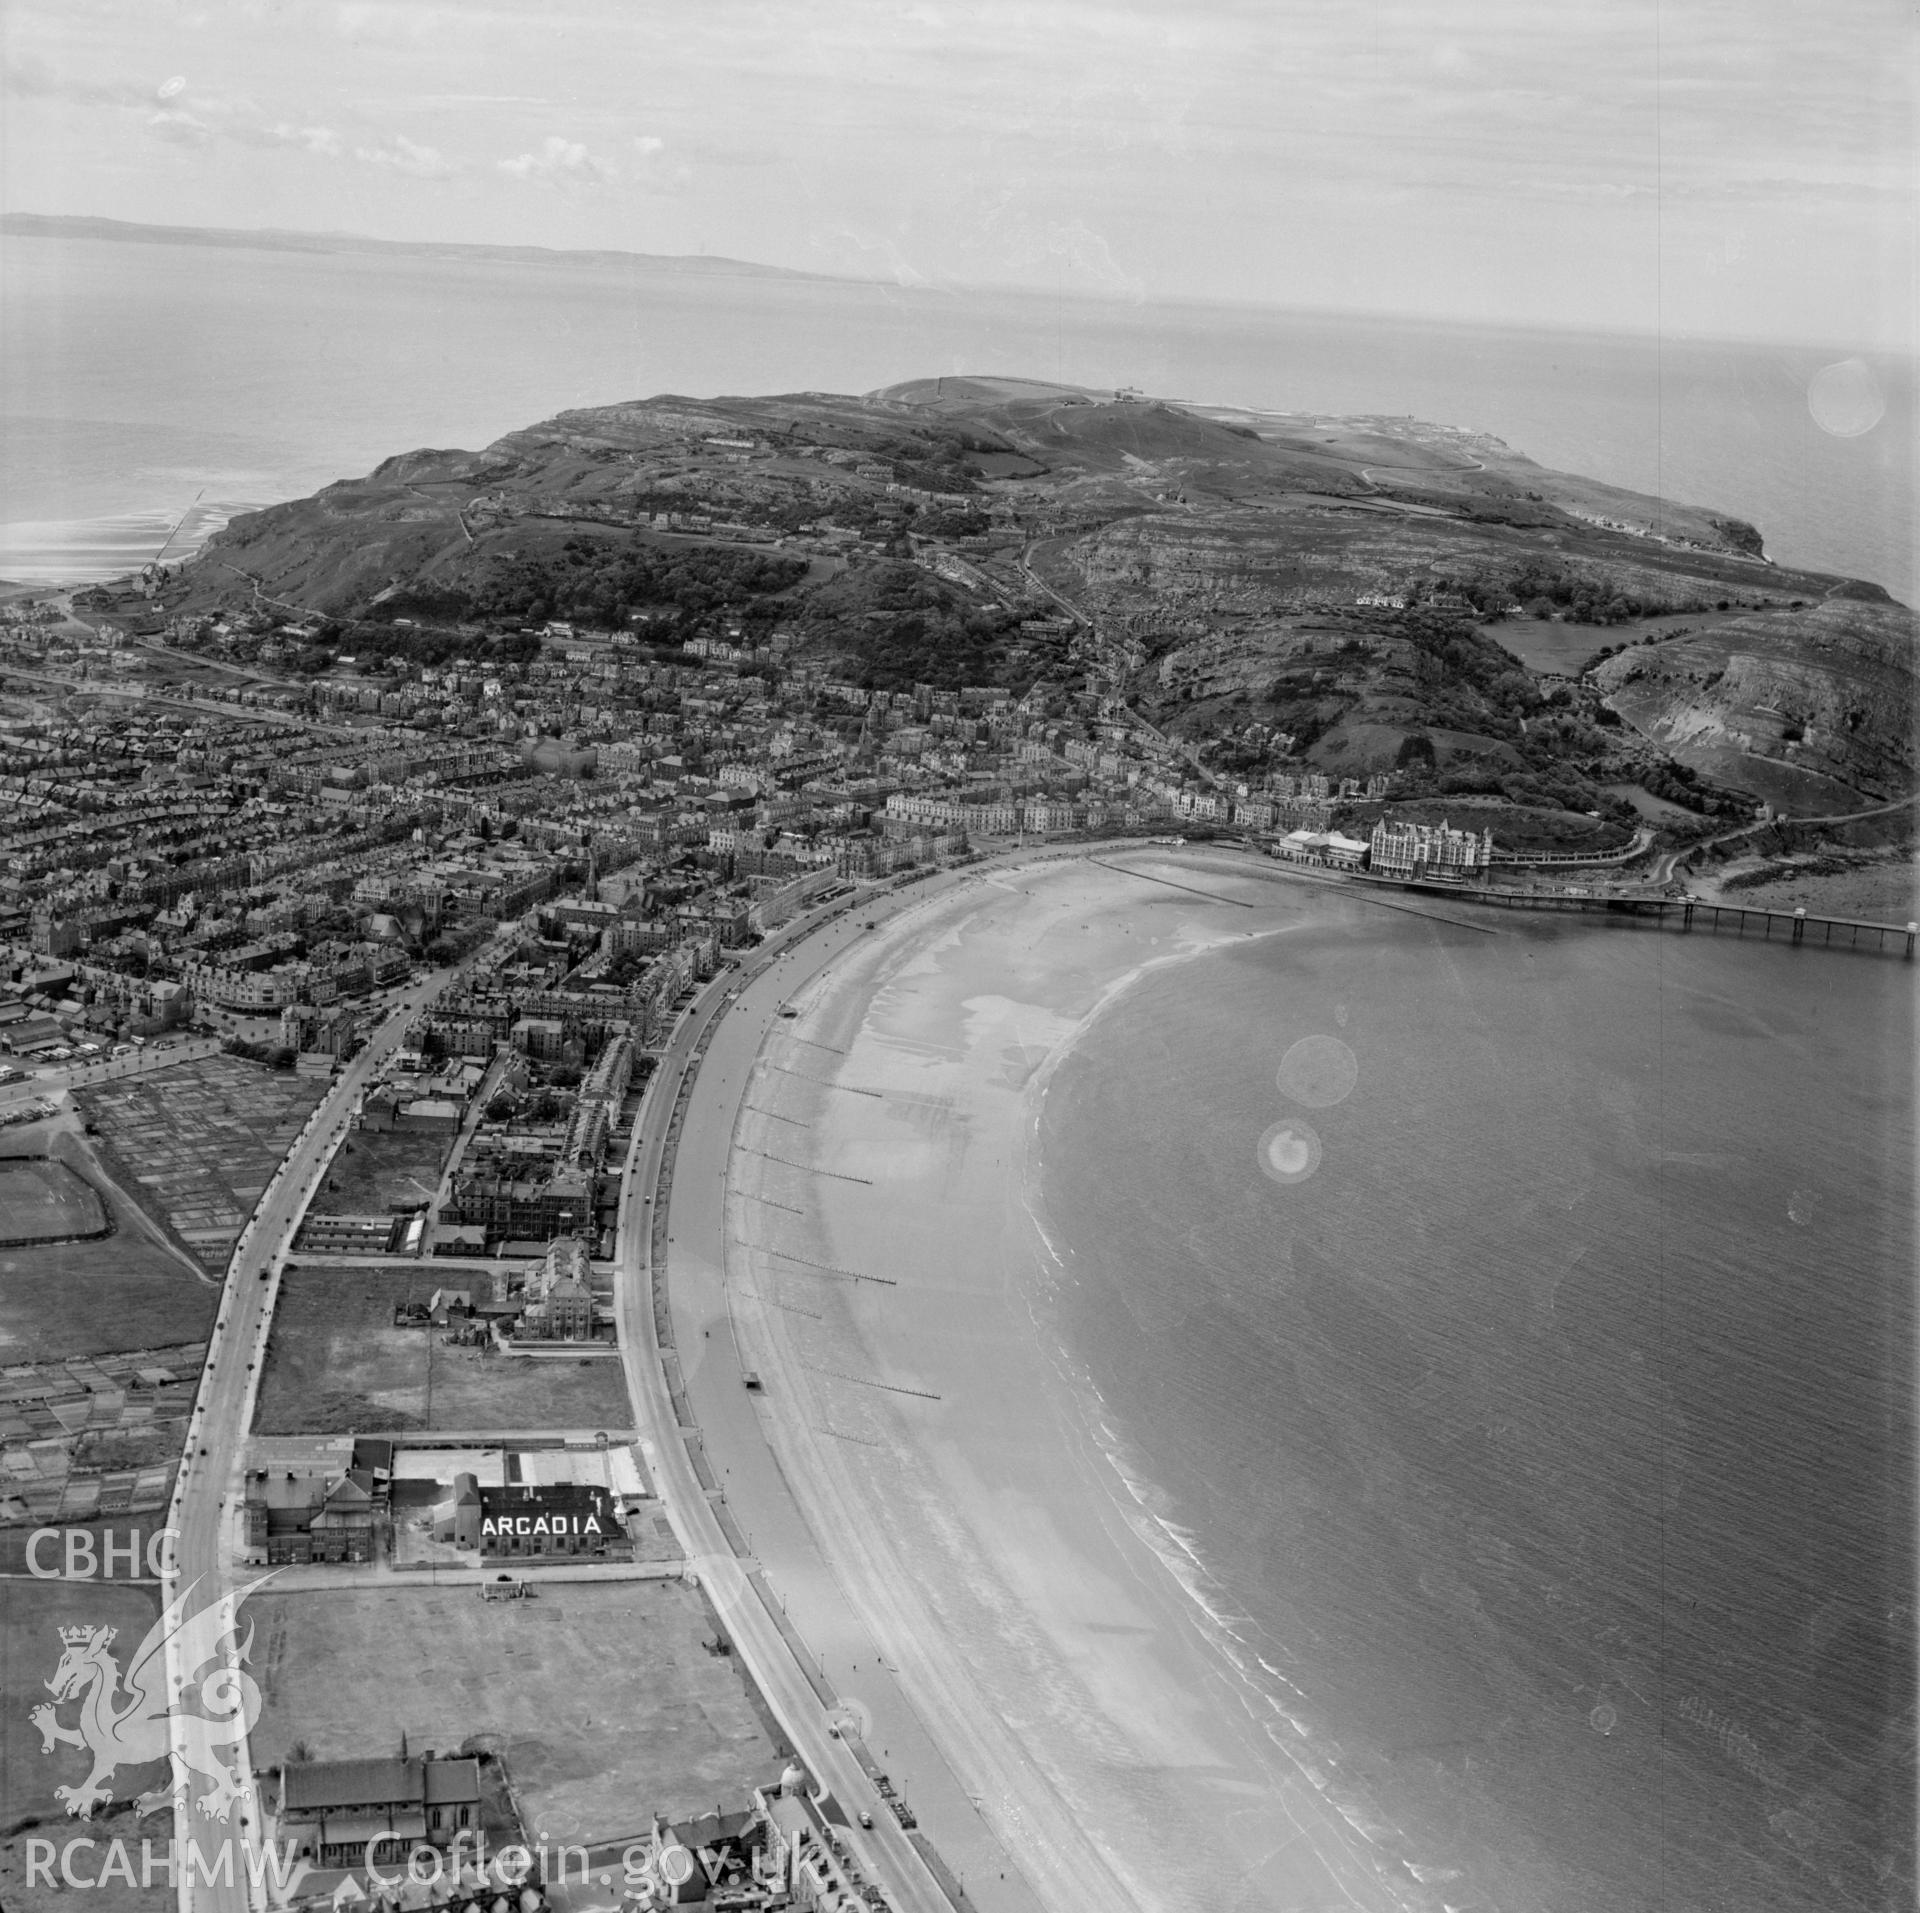 General view of Llandudno showing the Arcadia theatre